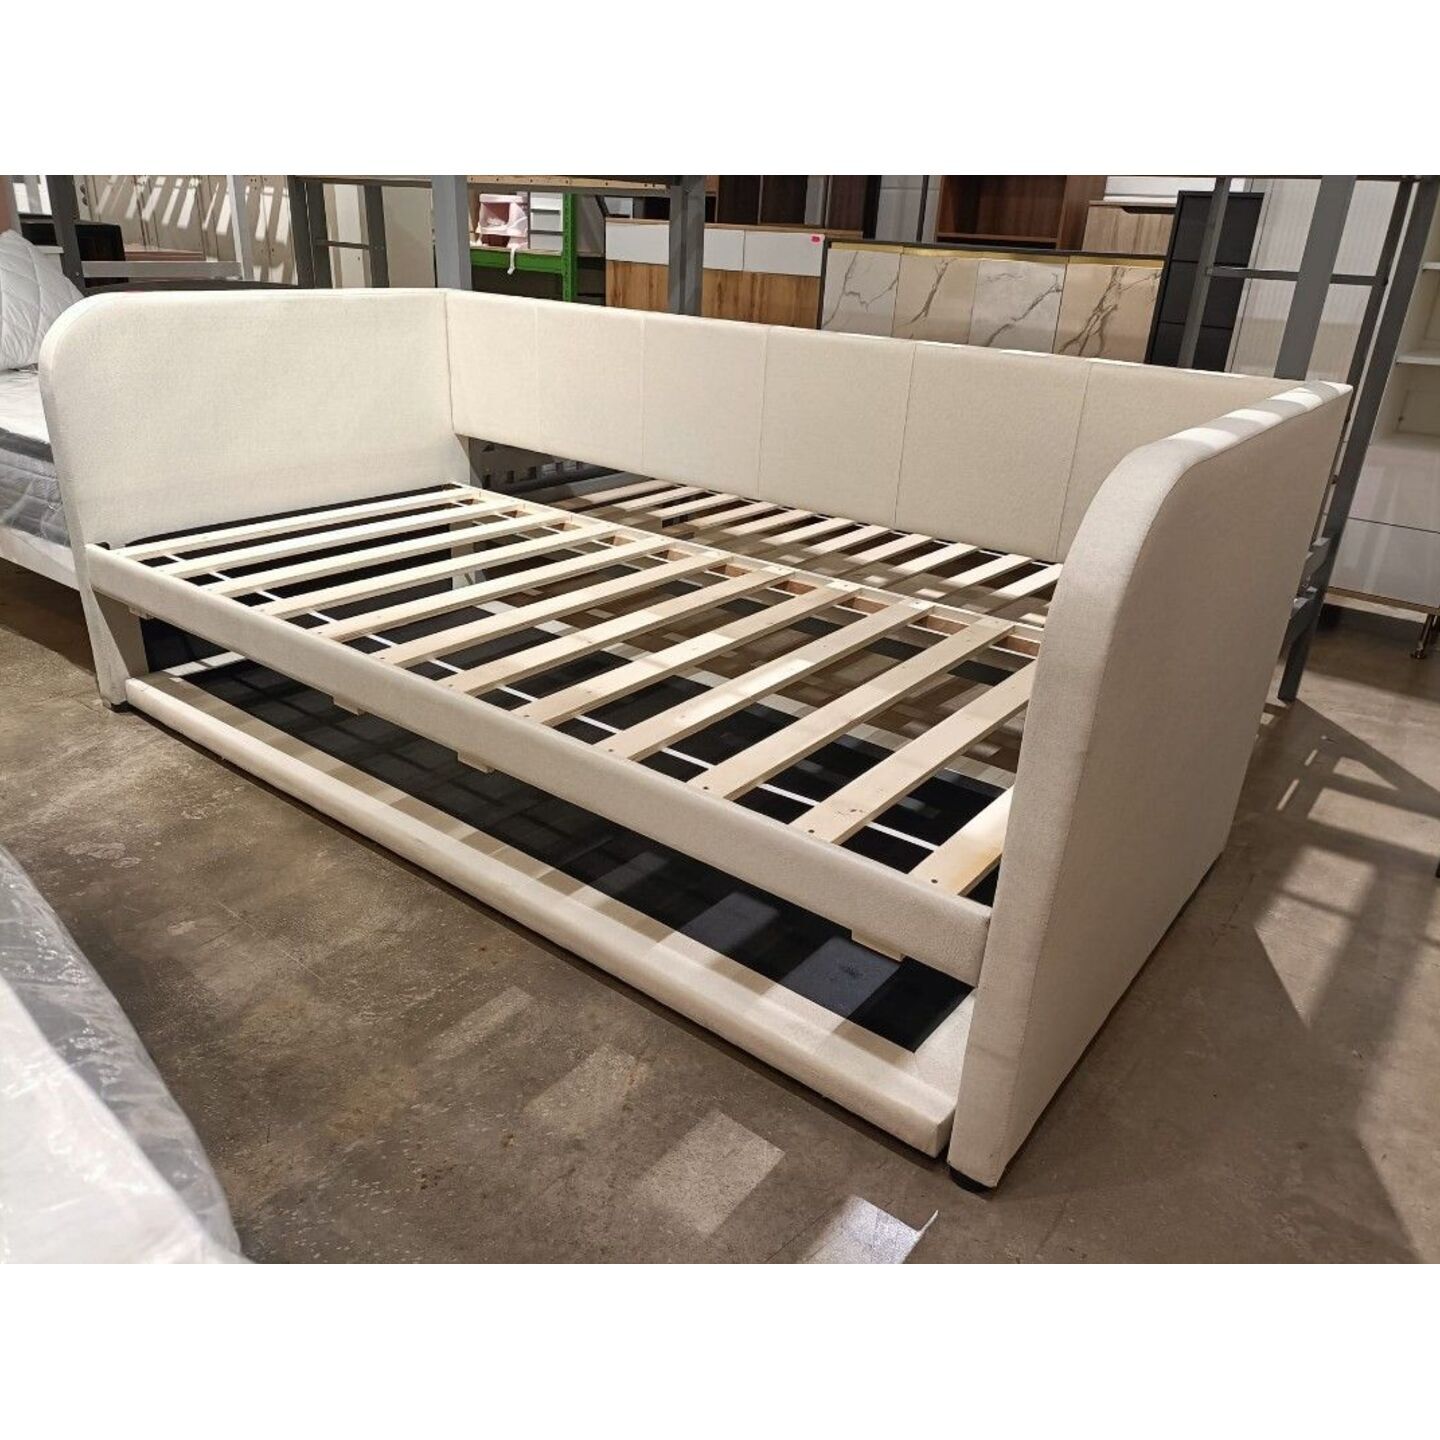 LAFAYA Single Day Bed with Pull Out Trundle in BEIGE FABRIC